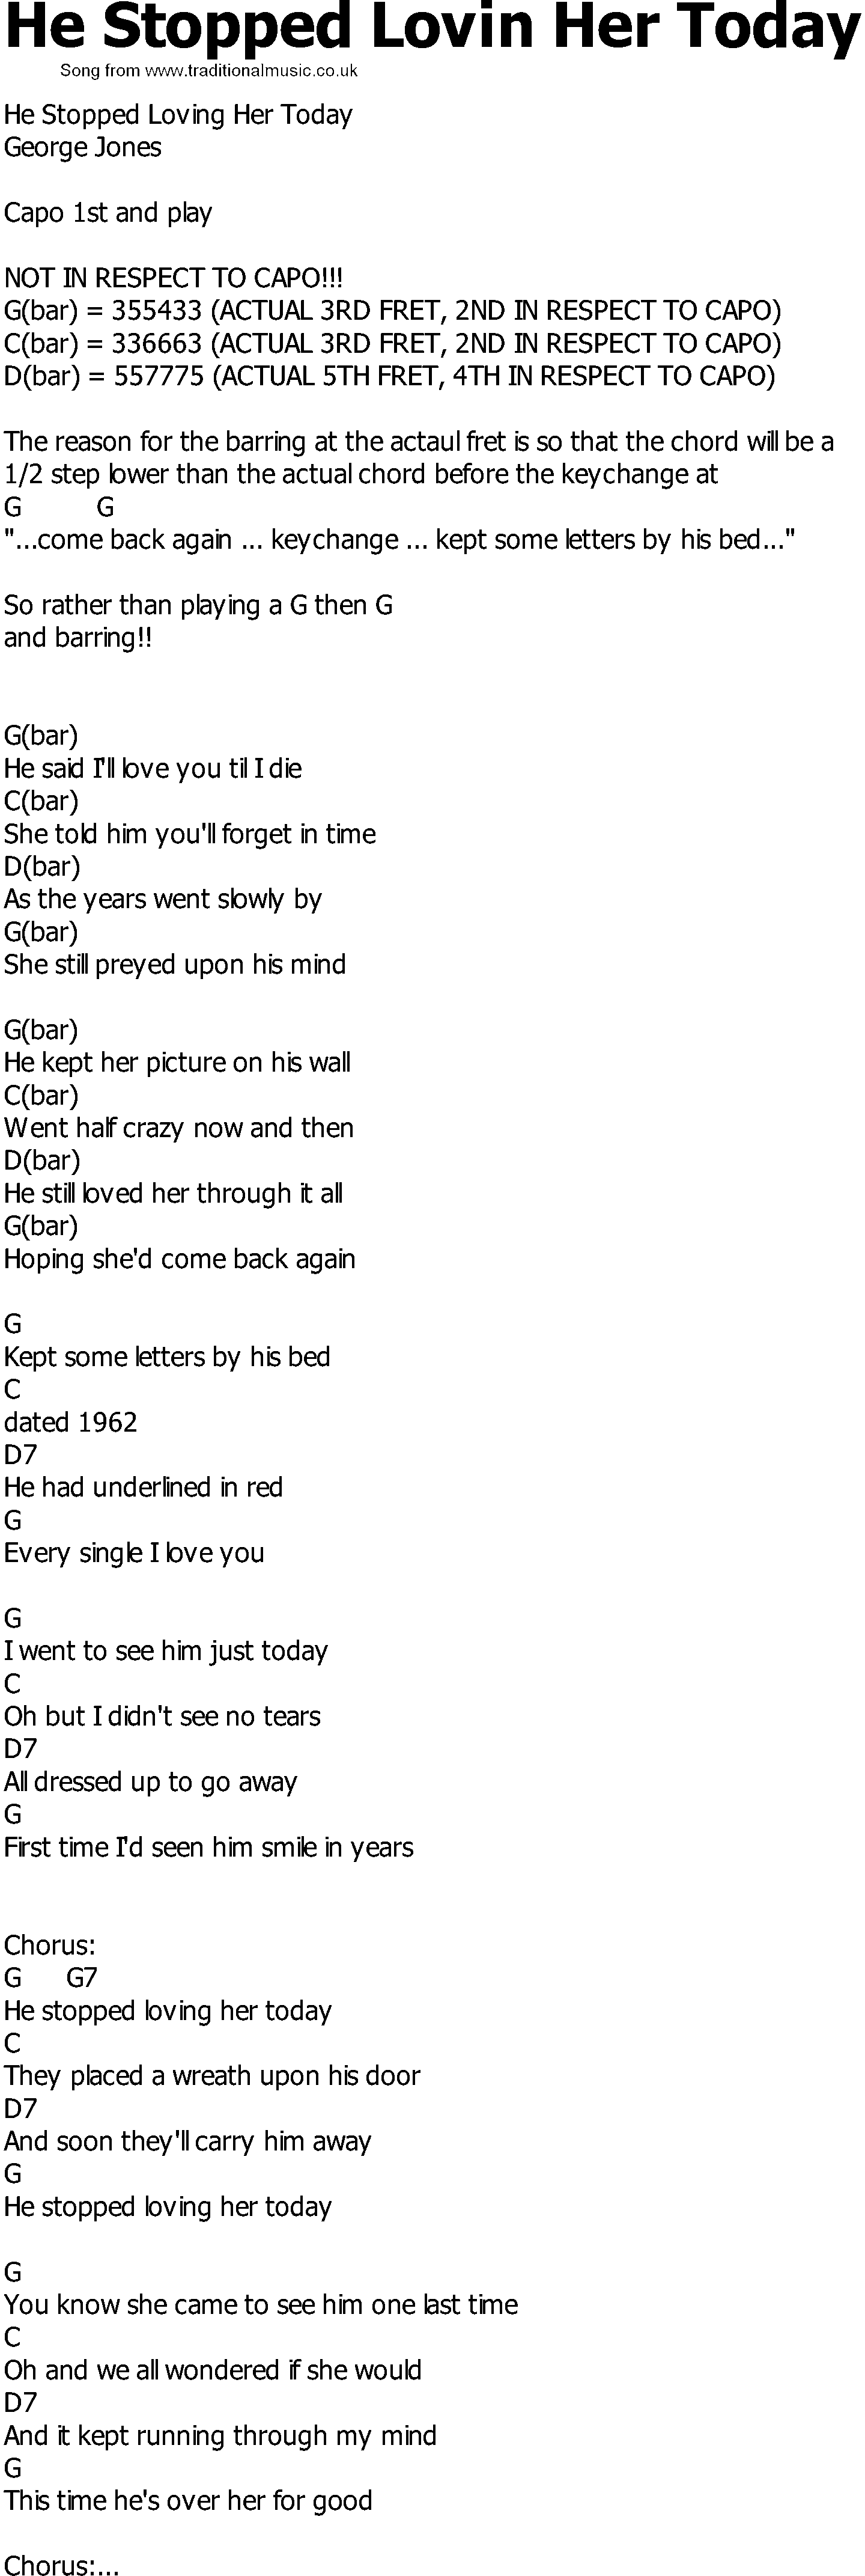 Old Country song lyrics with chords - He Stopped Lovin Her Today